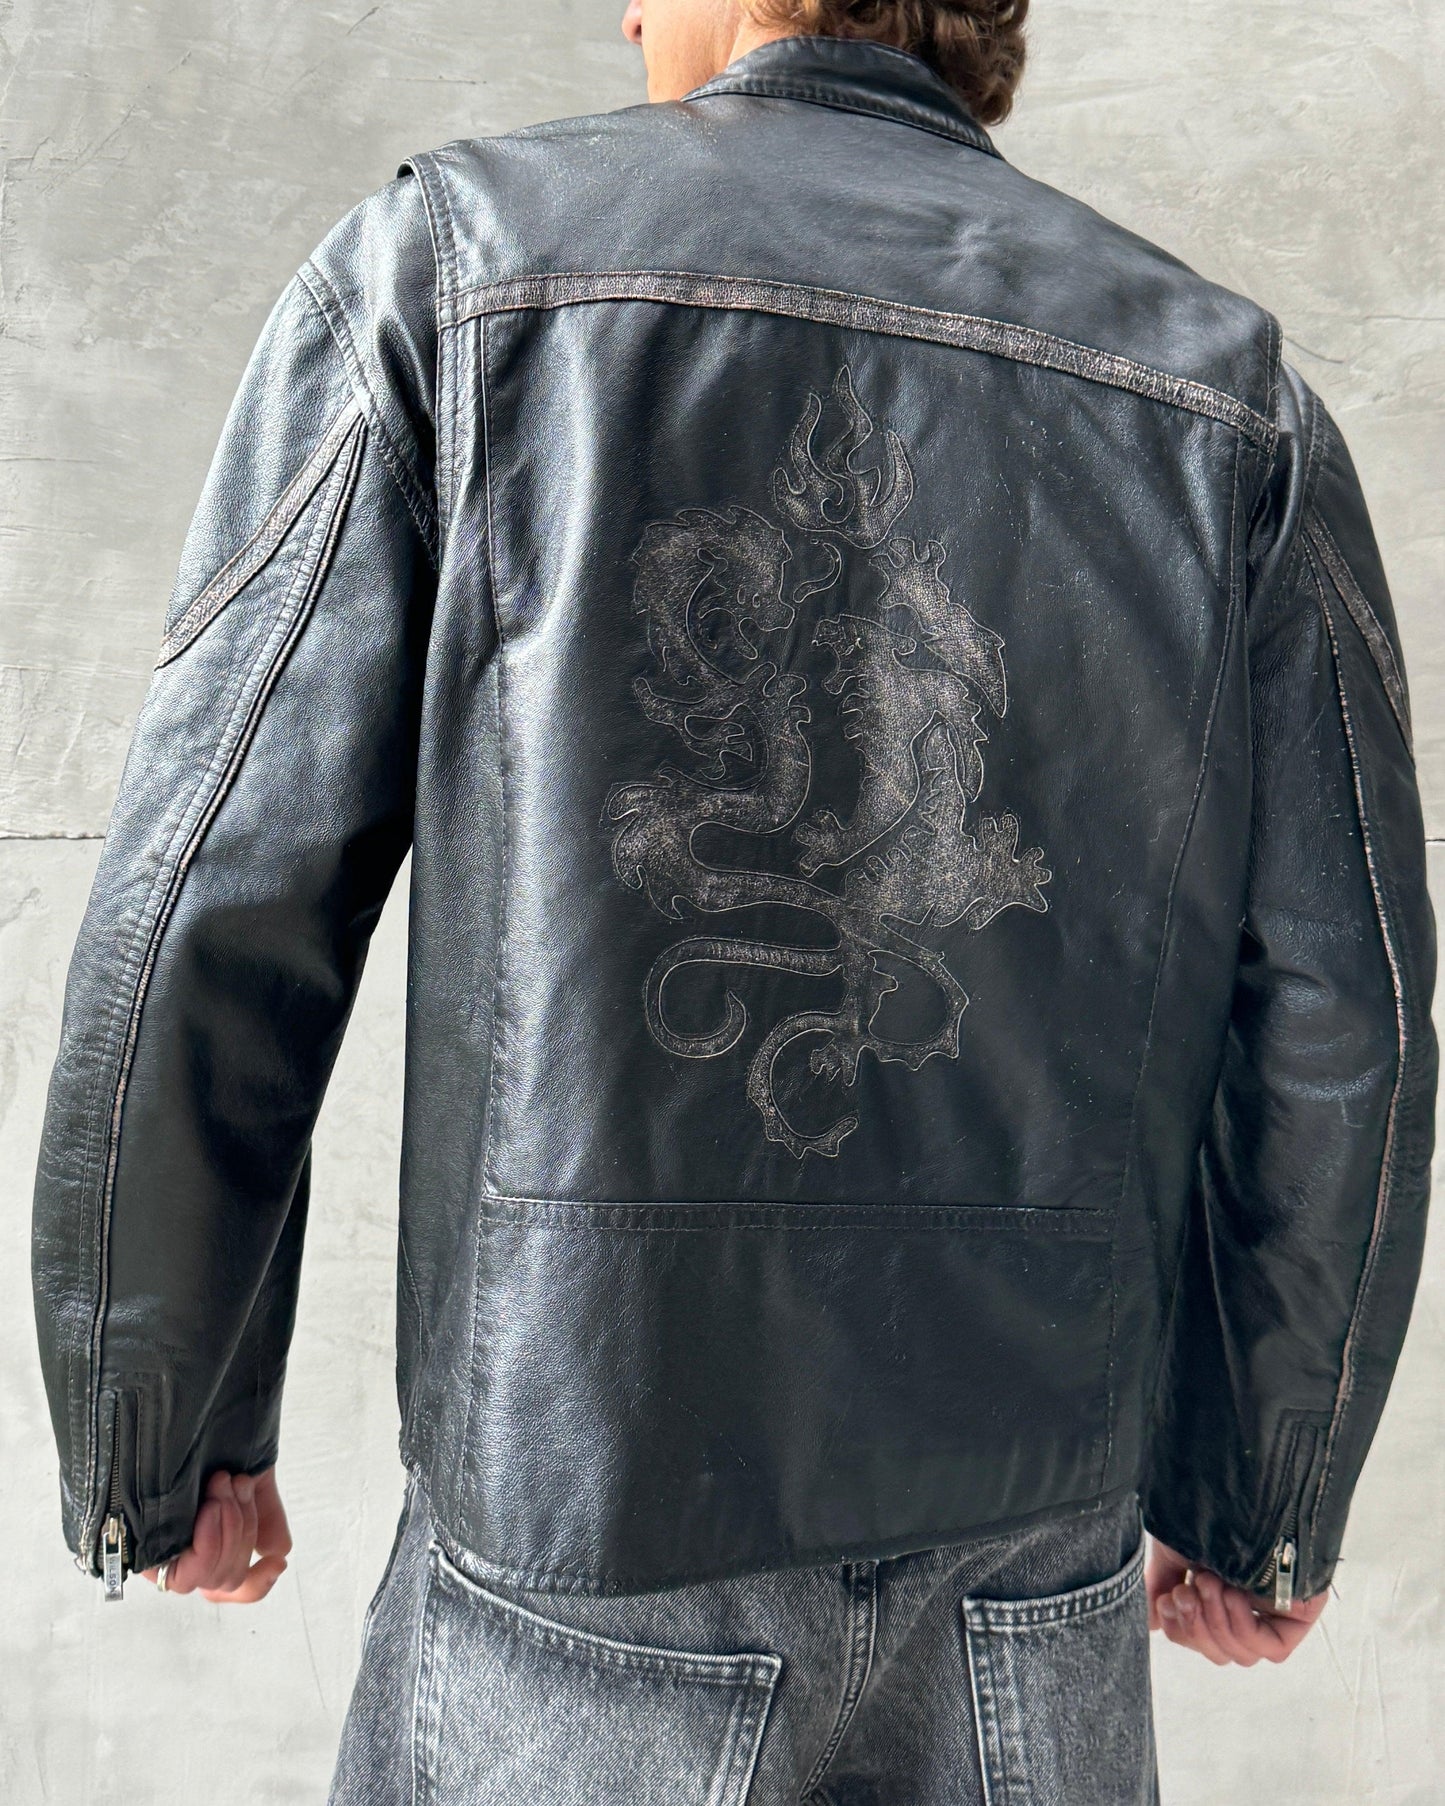 WILSONS 90'S DRAGON BLACK LEATHER JACKET - L - Known Source